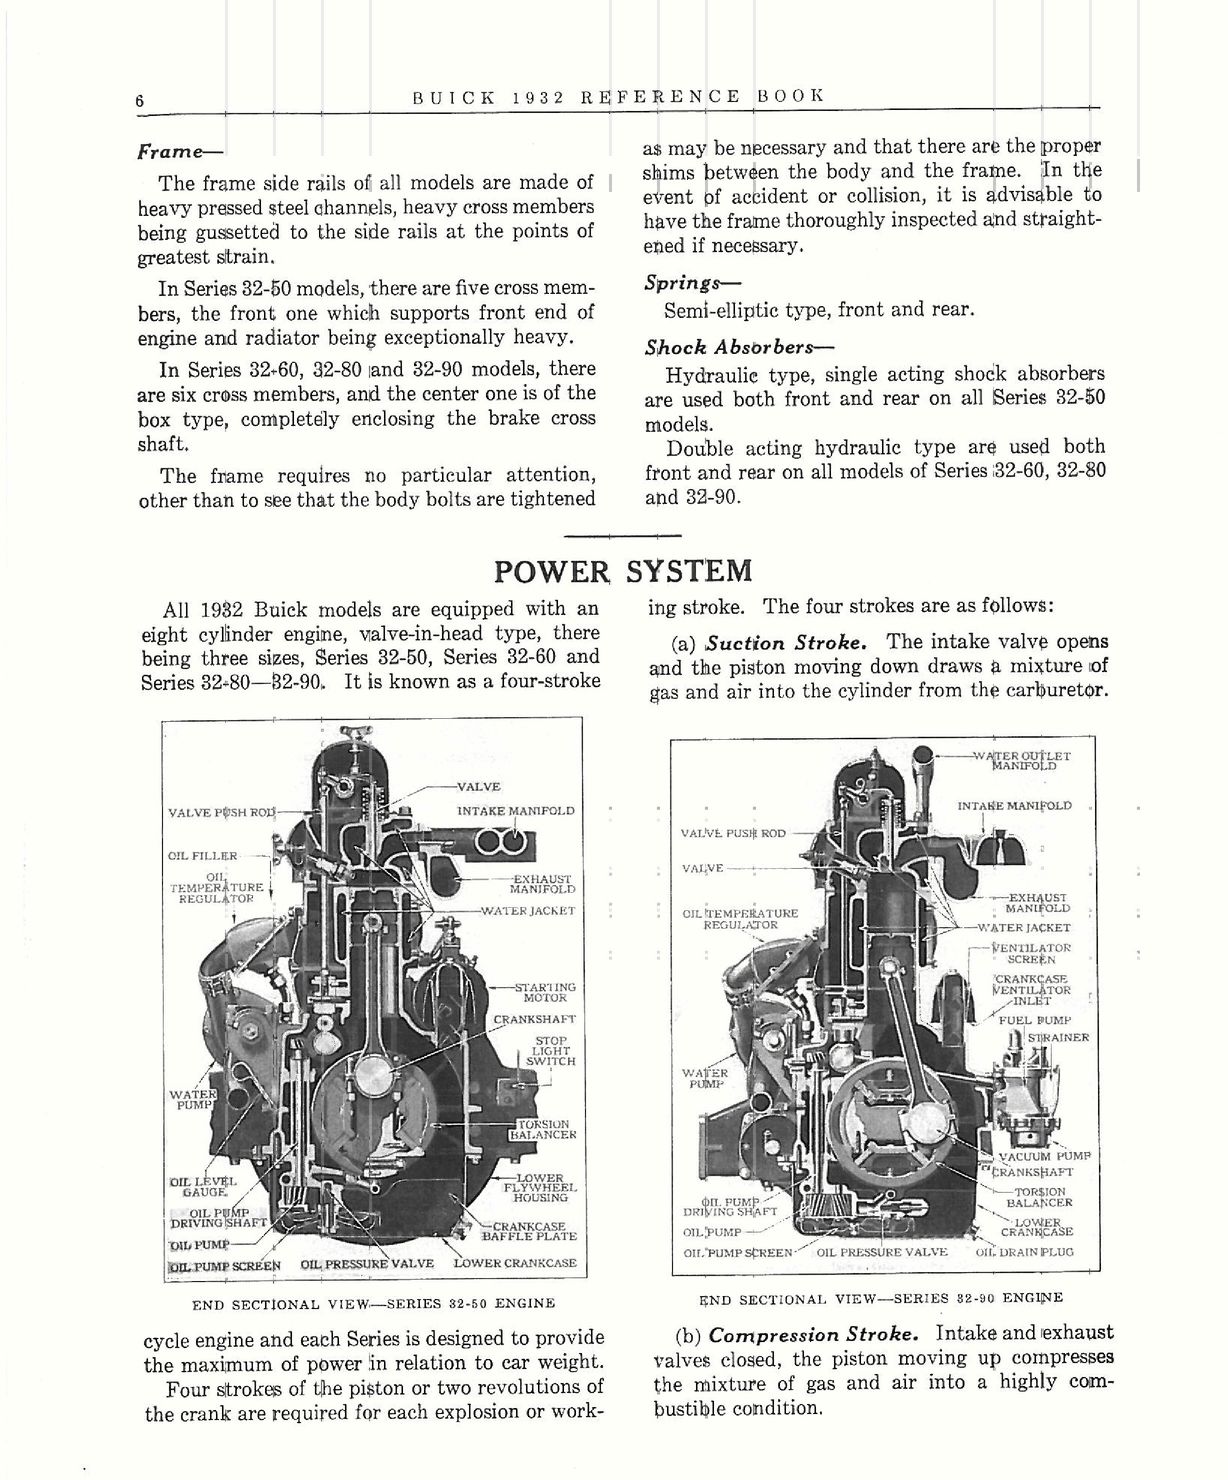 1932 Buick Reference Book-06